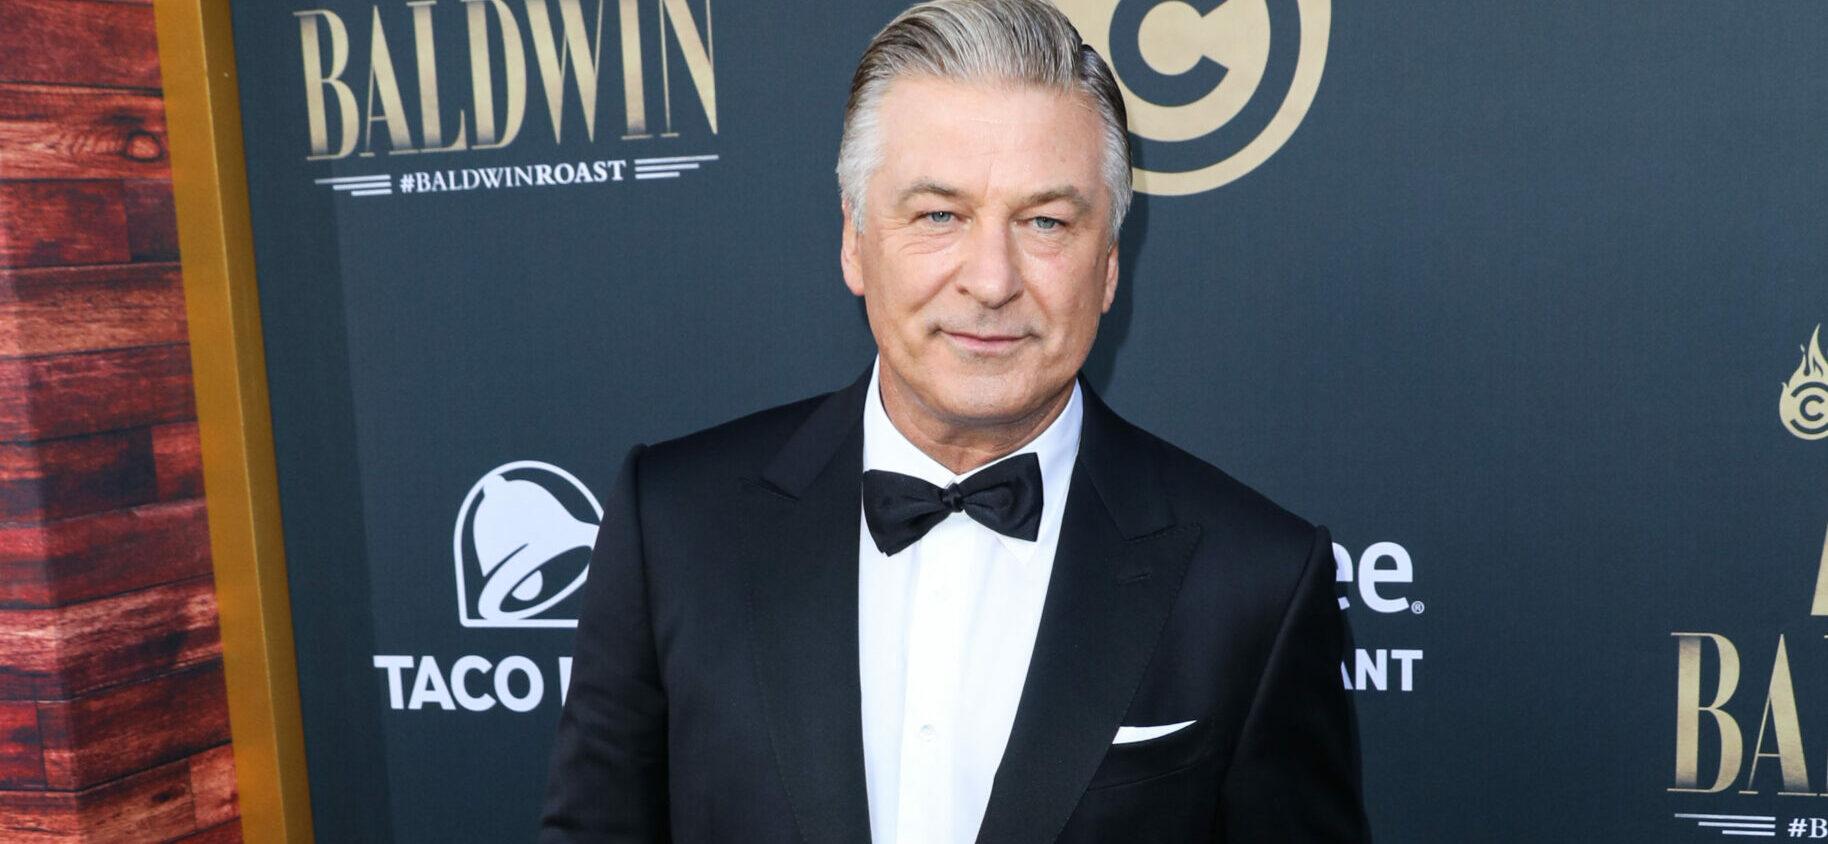 Alec Baldwin Cancels Other Film Projects Following Accidental Shooting, Remains ‘Absolutely Devastated’